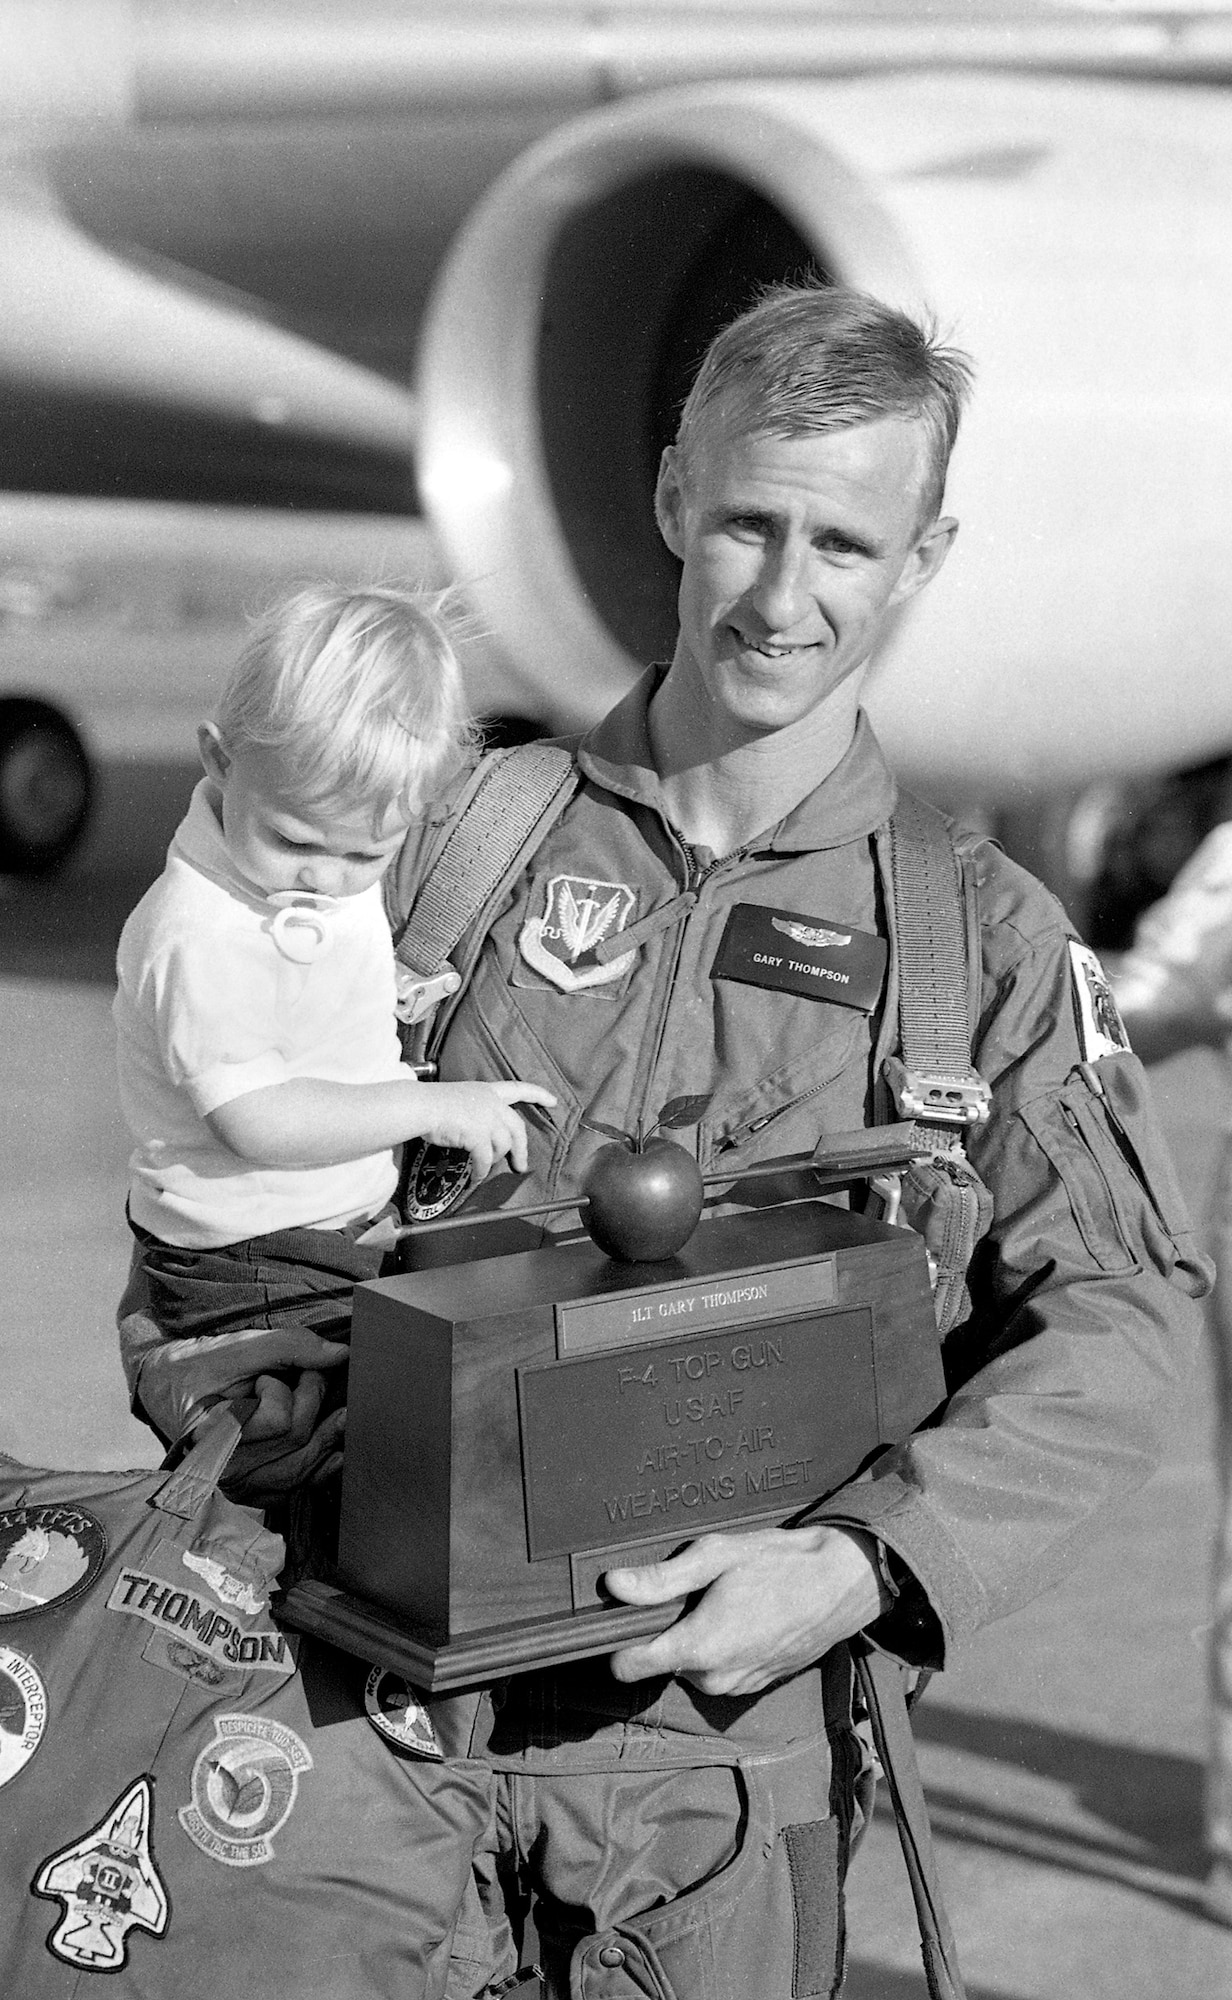 Oregon Air National 1st Lt. Gary Thompson with his son Jason pose for a photograph at the Portland Air National Guard Base, Portland, Ore., in August of 1988, after he has returned from the 1988 William Tell Weapons Meet at Tyndall AFB, Fla. after winning the Top Shooter award.  (photo courtesy of the 142nd Fighter Wing Public Affairs Department)